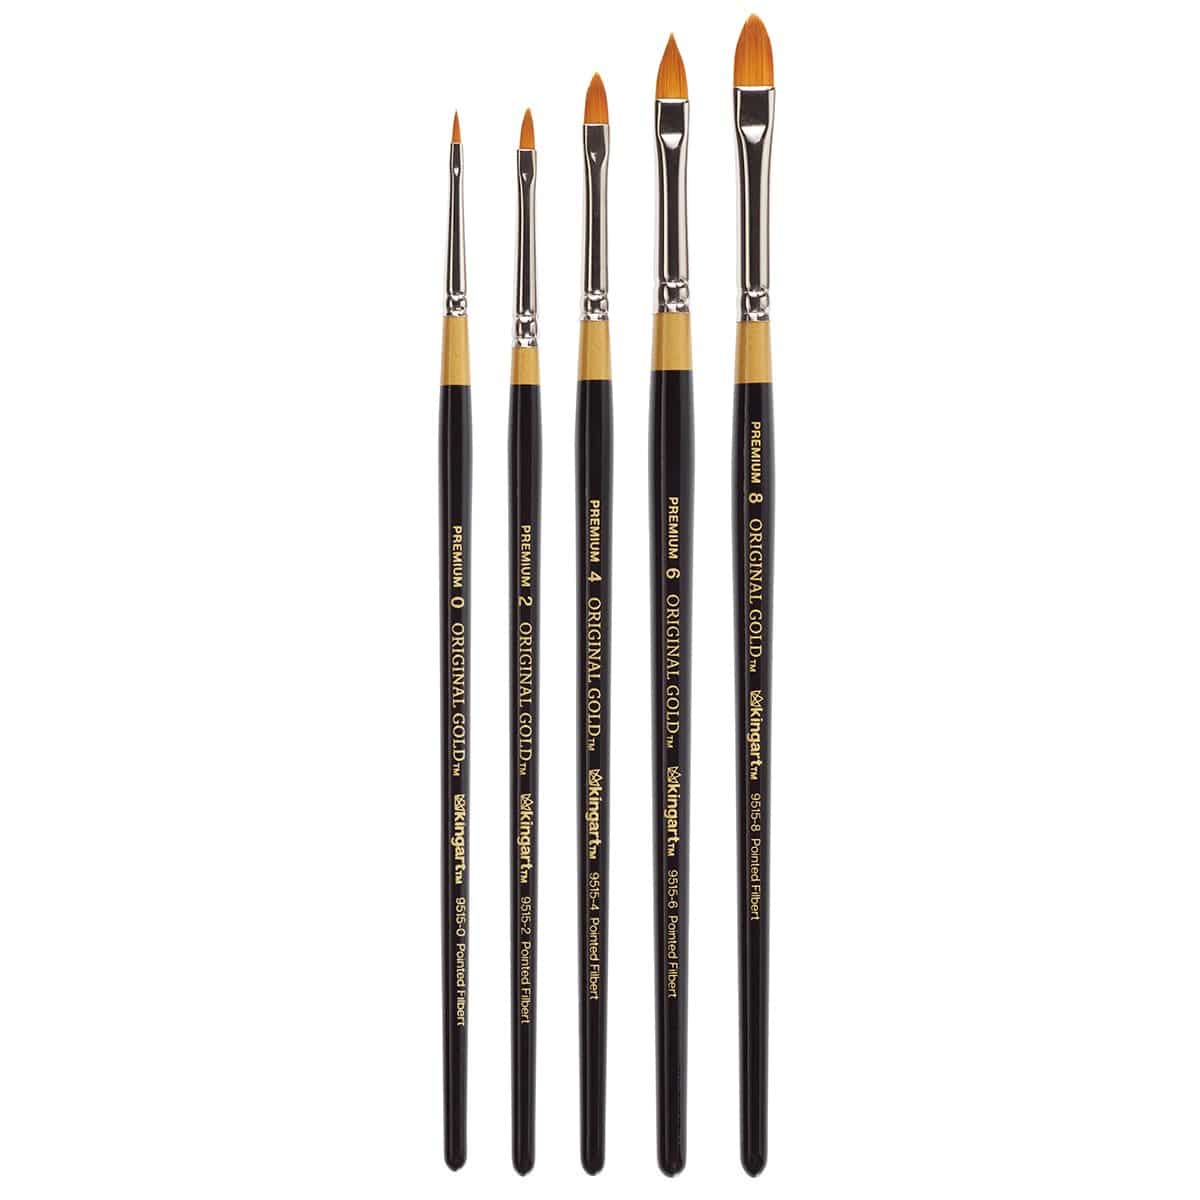 Original Gold Filbert Rake Series 9520 by Kingart™-UP TO 60% OFF - Brushes  and More